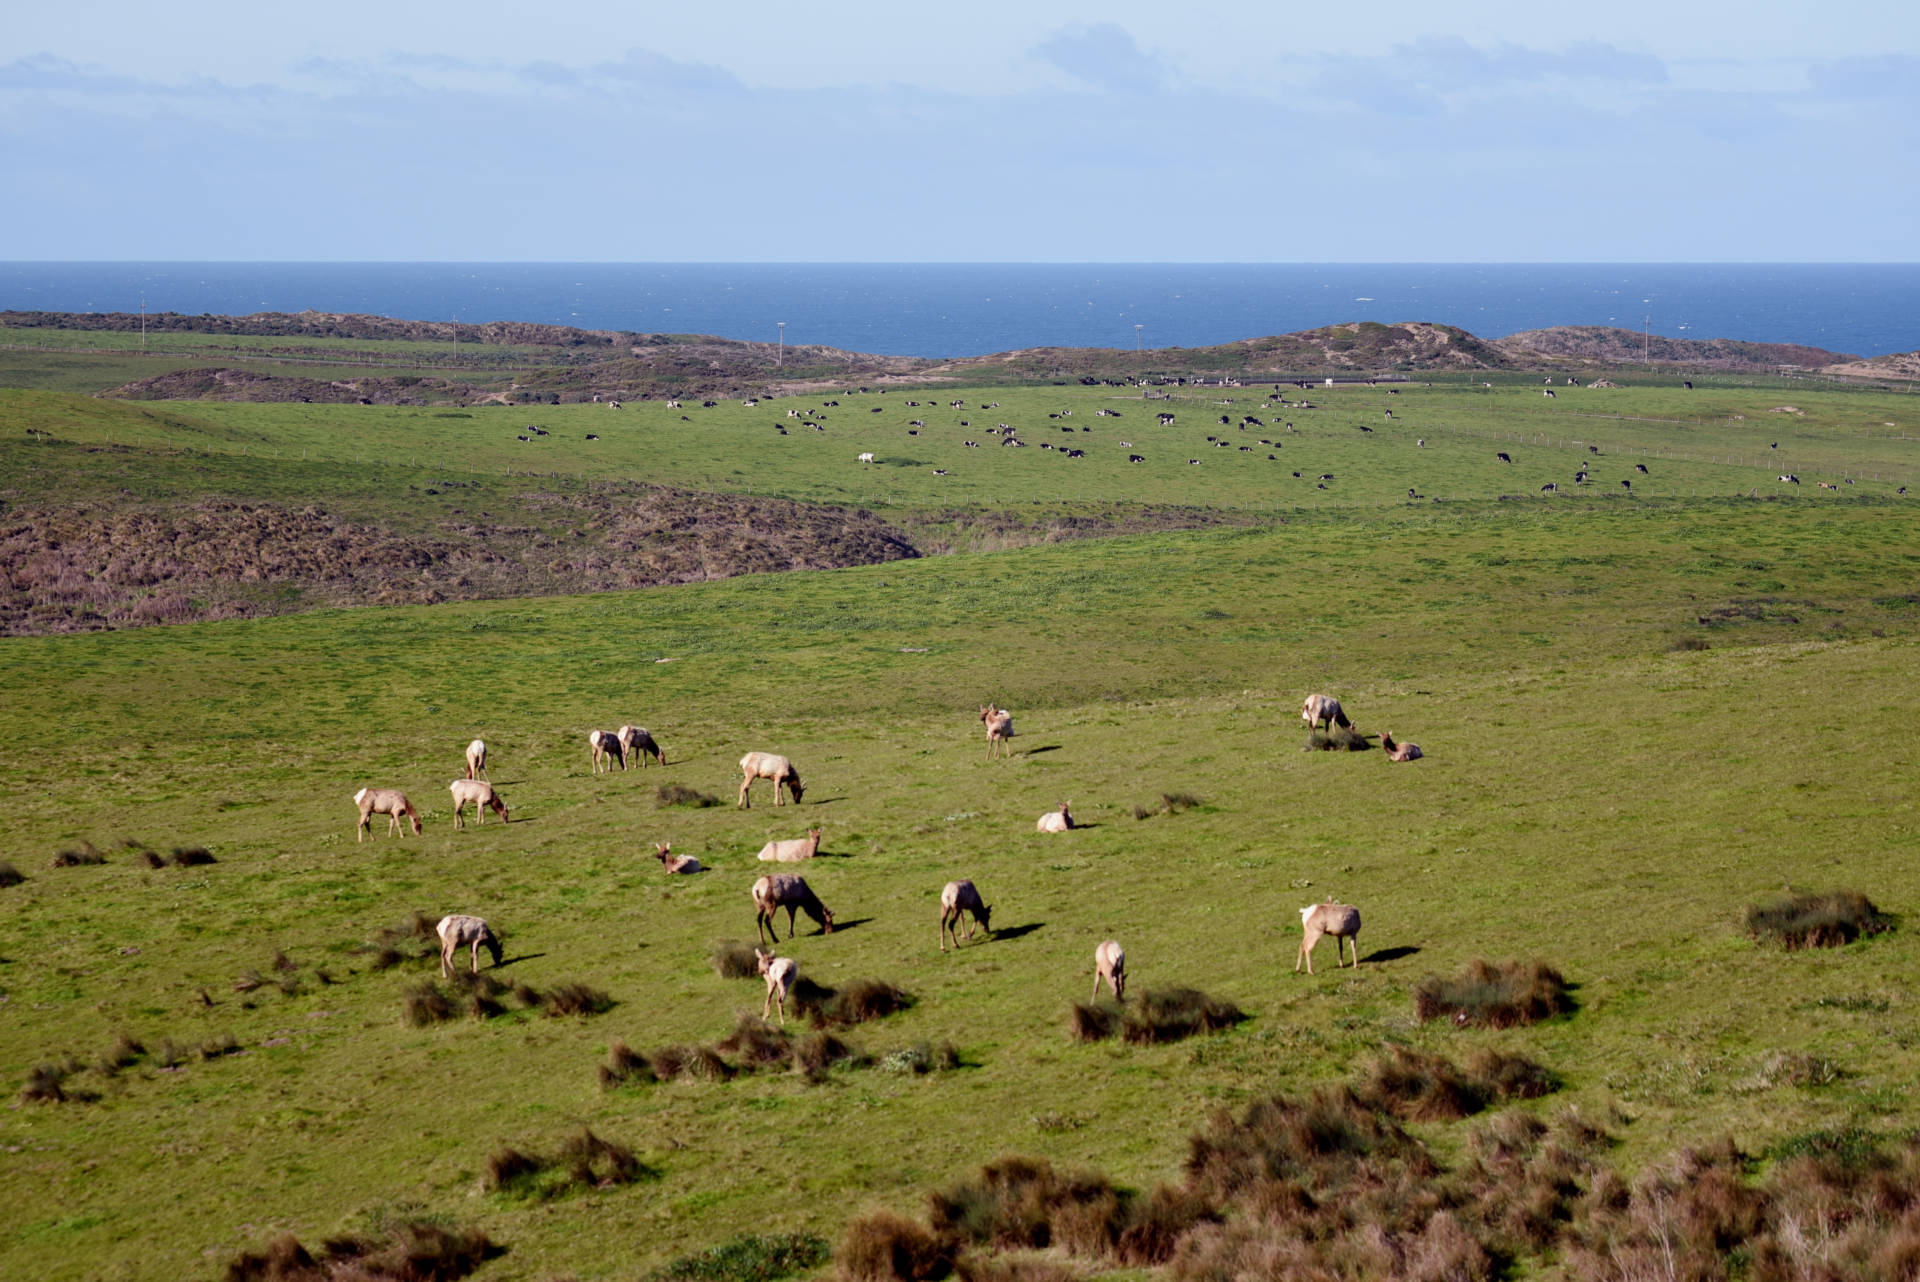 Tule elk graze in the foreground while cattle graze in the background at Point Reyes National Seashore in February.  Lauren Hanussak/KQED